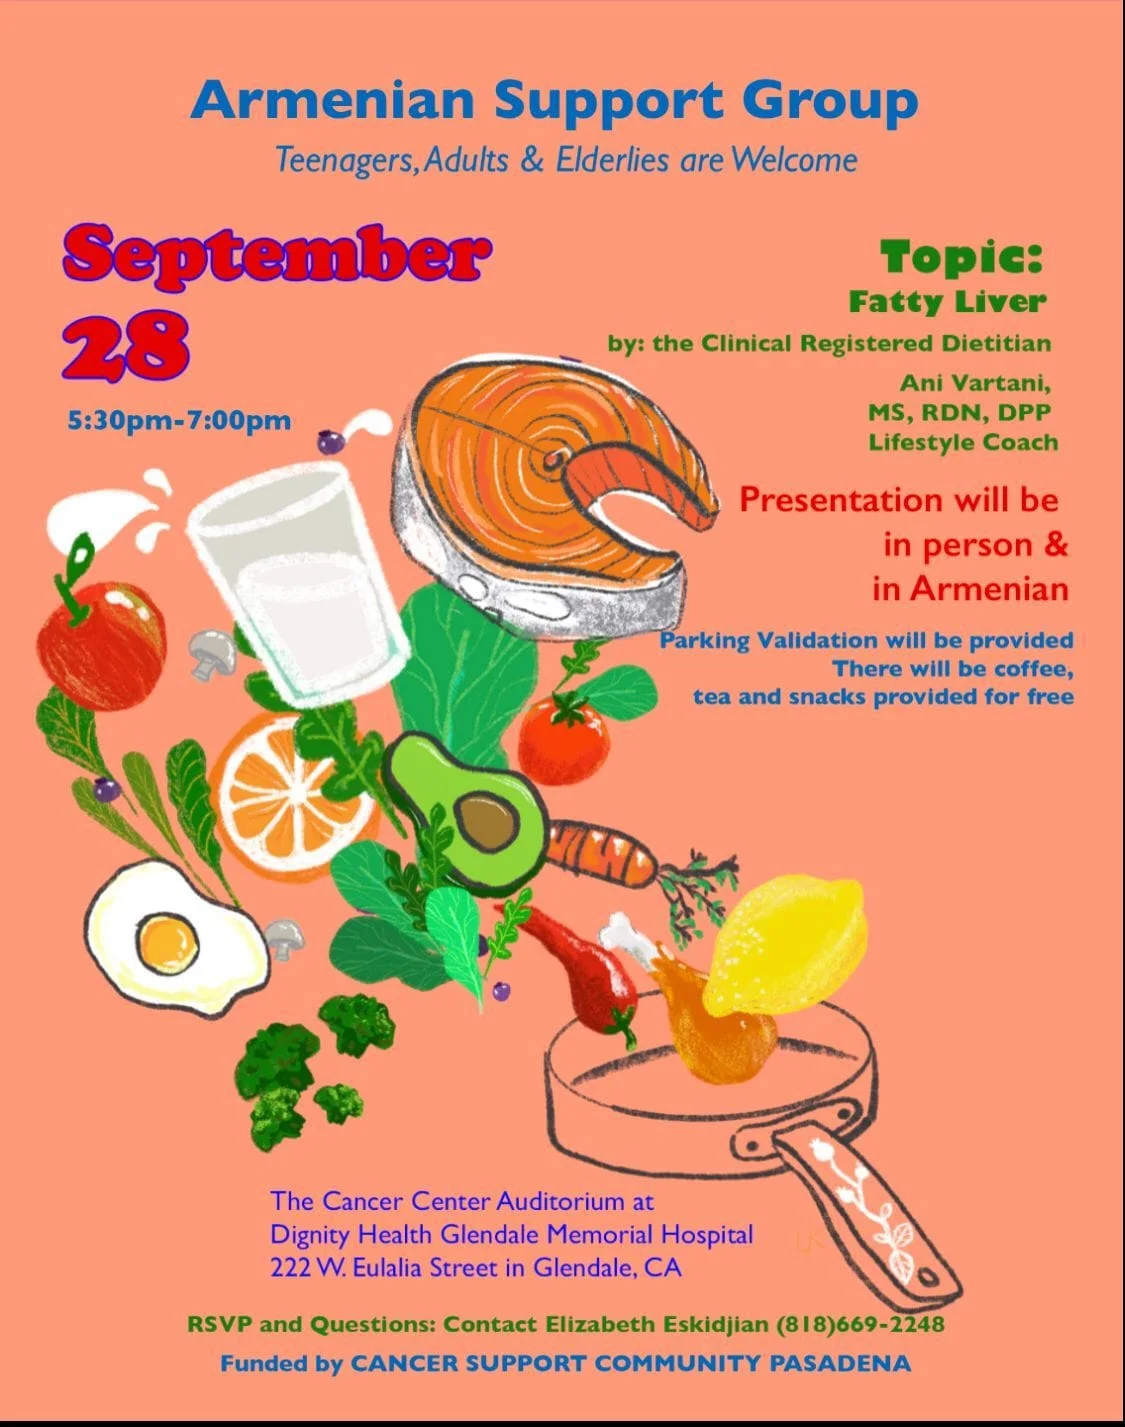 Join us on September 28th at 5:30 pm on a presentation “ Fatty Liver" by Clinical Registered Dietitian, Ani Vartani, MS, RDN, DPP Lifestyle Coach. The flyer contains all the details, including the information about parking validation, free food, coffee, and tea. Kindly RSVP. Don't hesitate to share this event is free. Thank you!